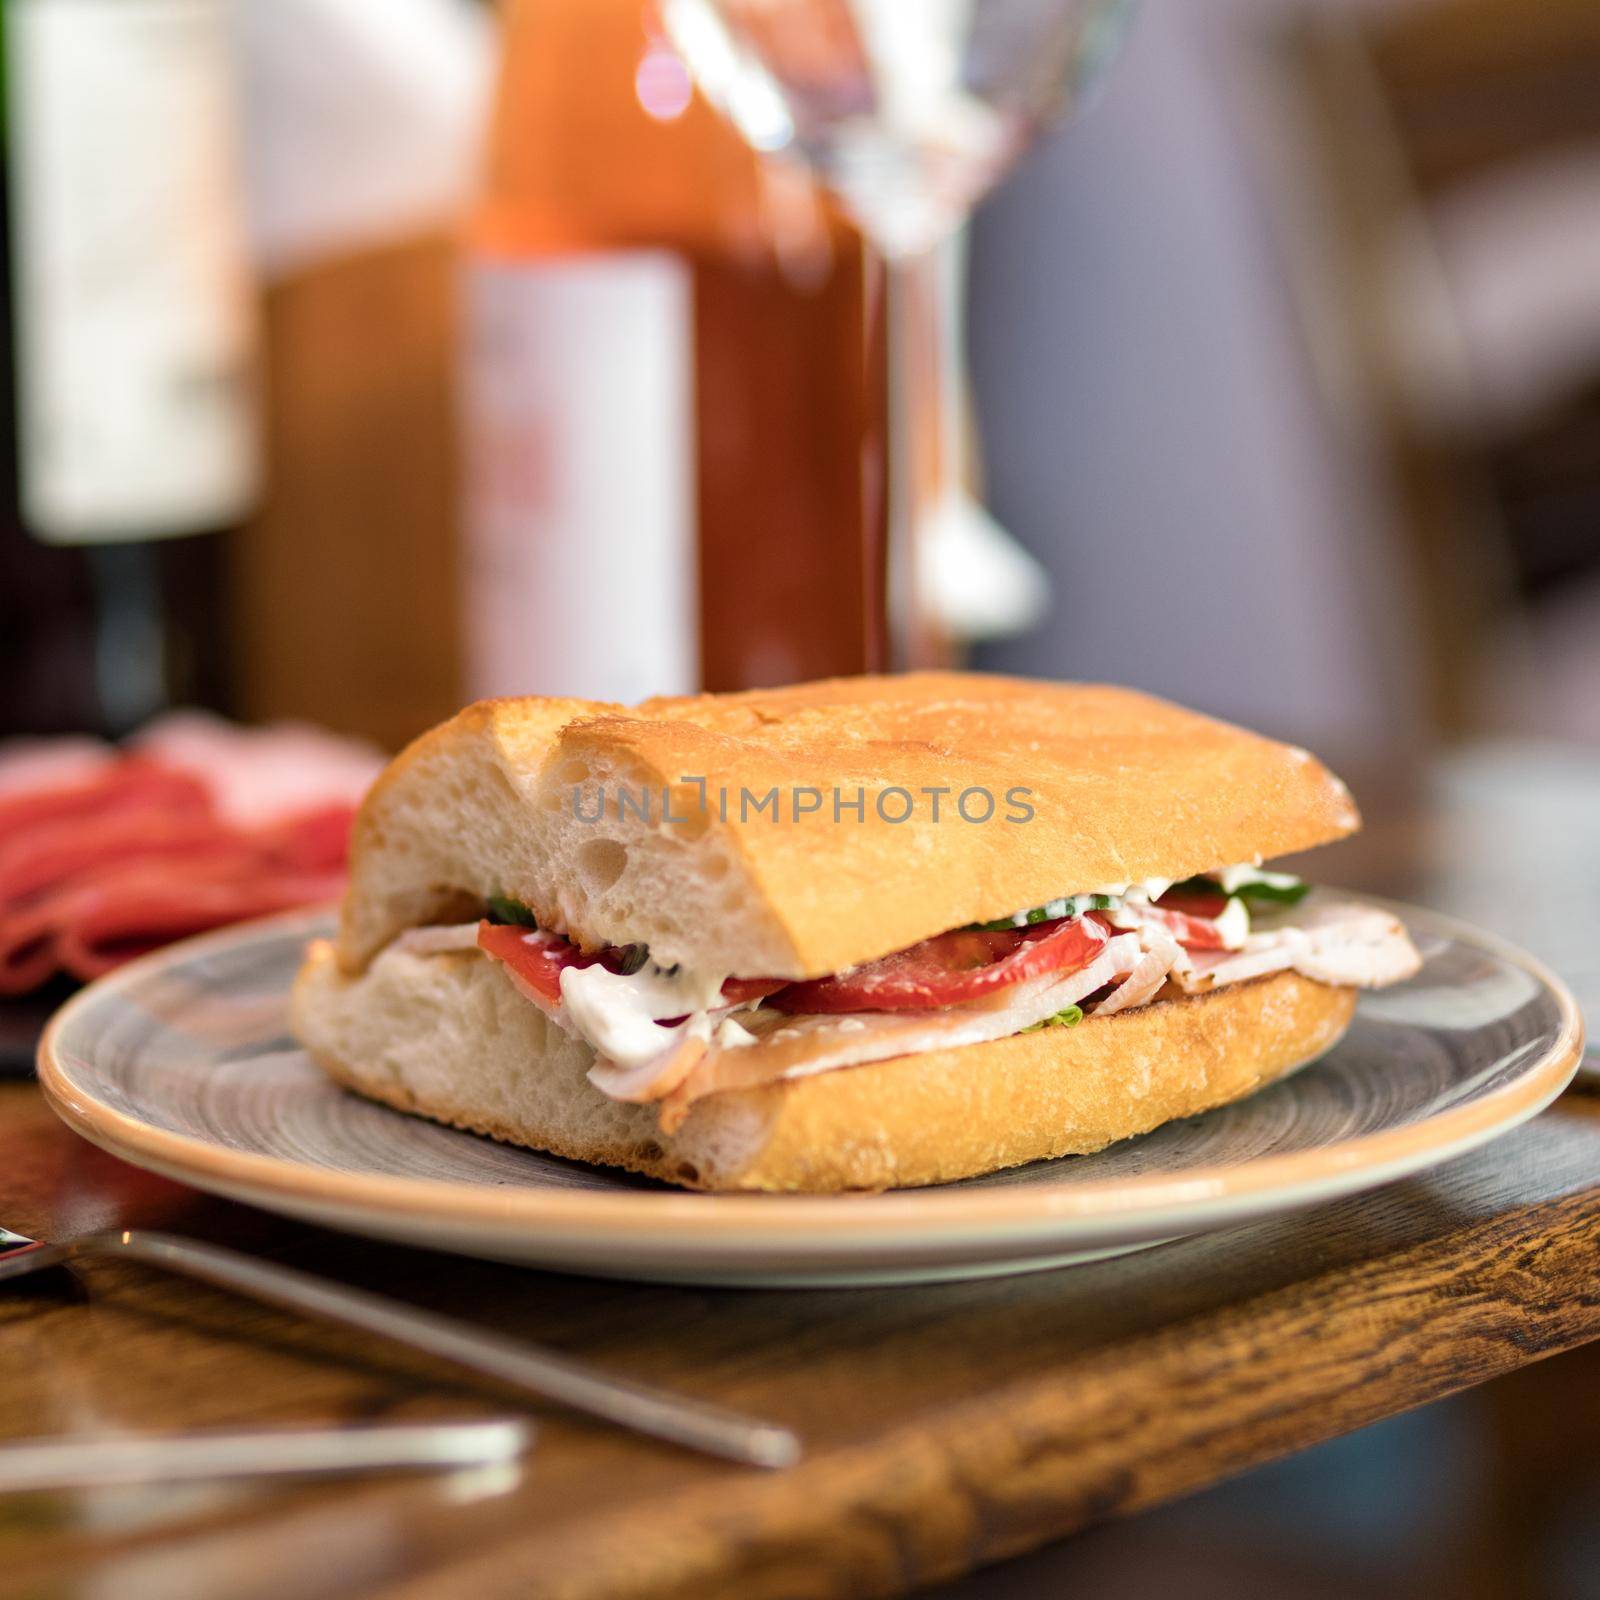 Tasty sandwich with red wine on the table by ferhad